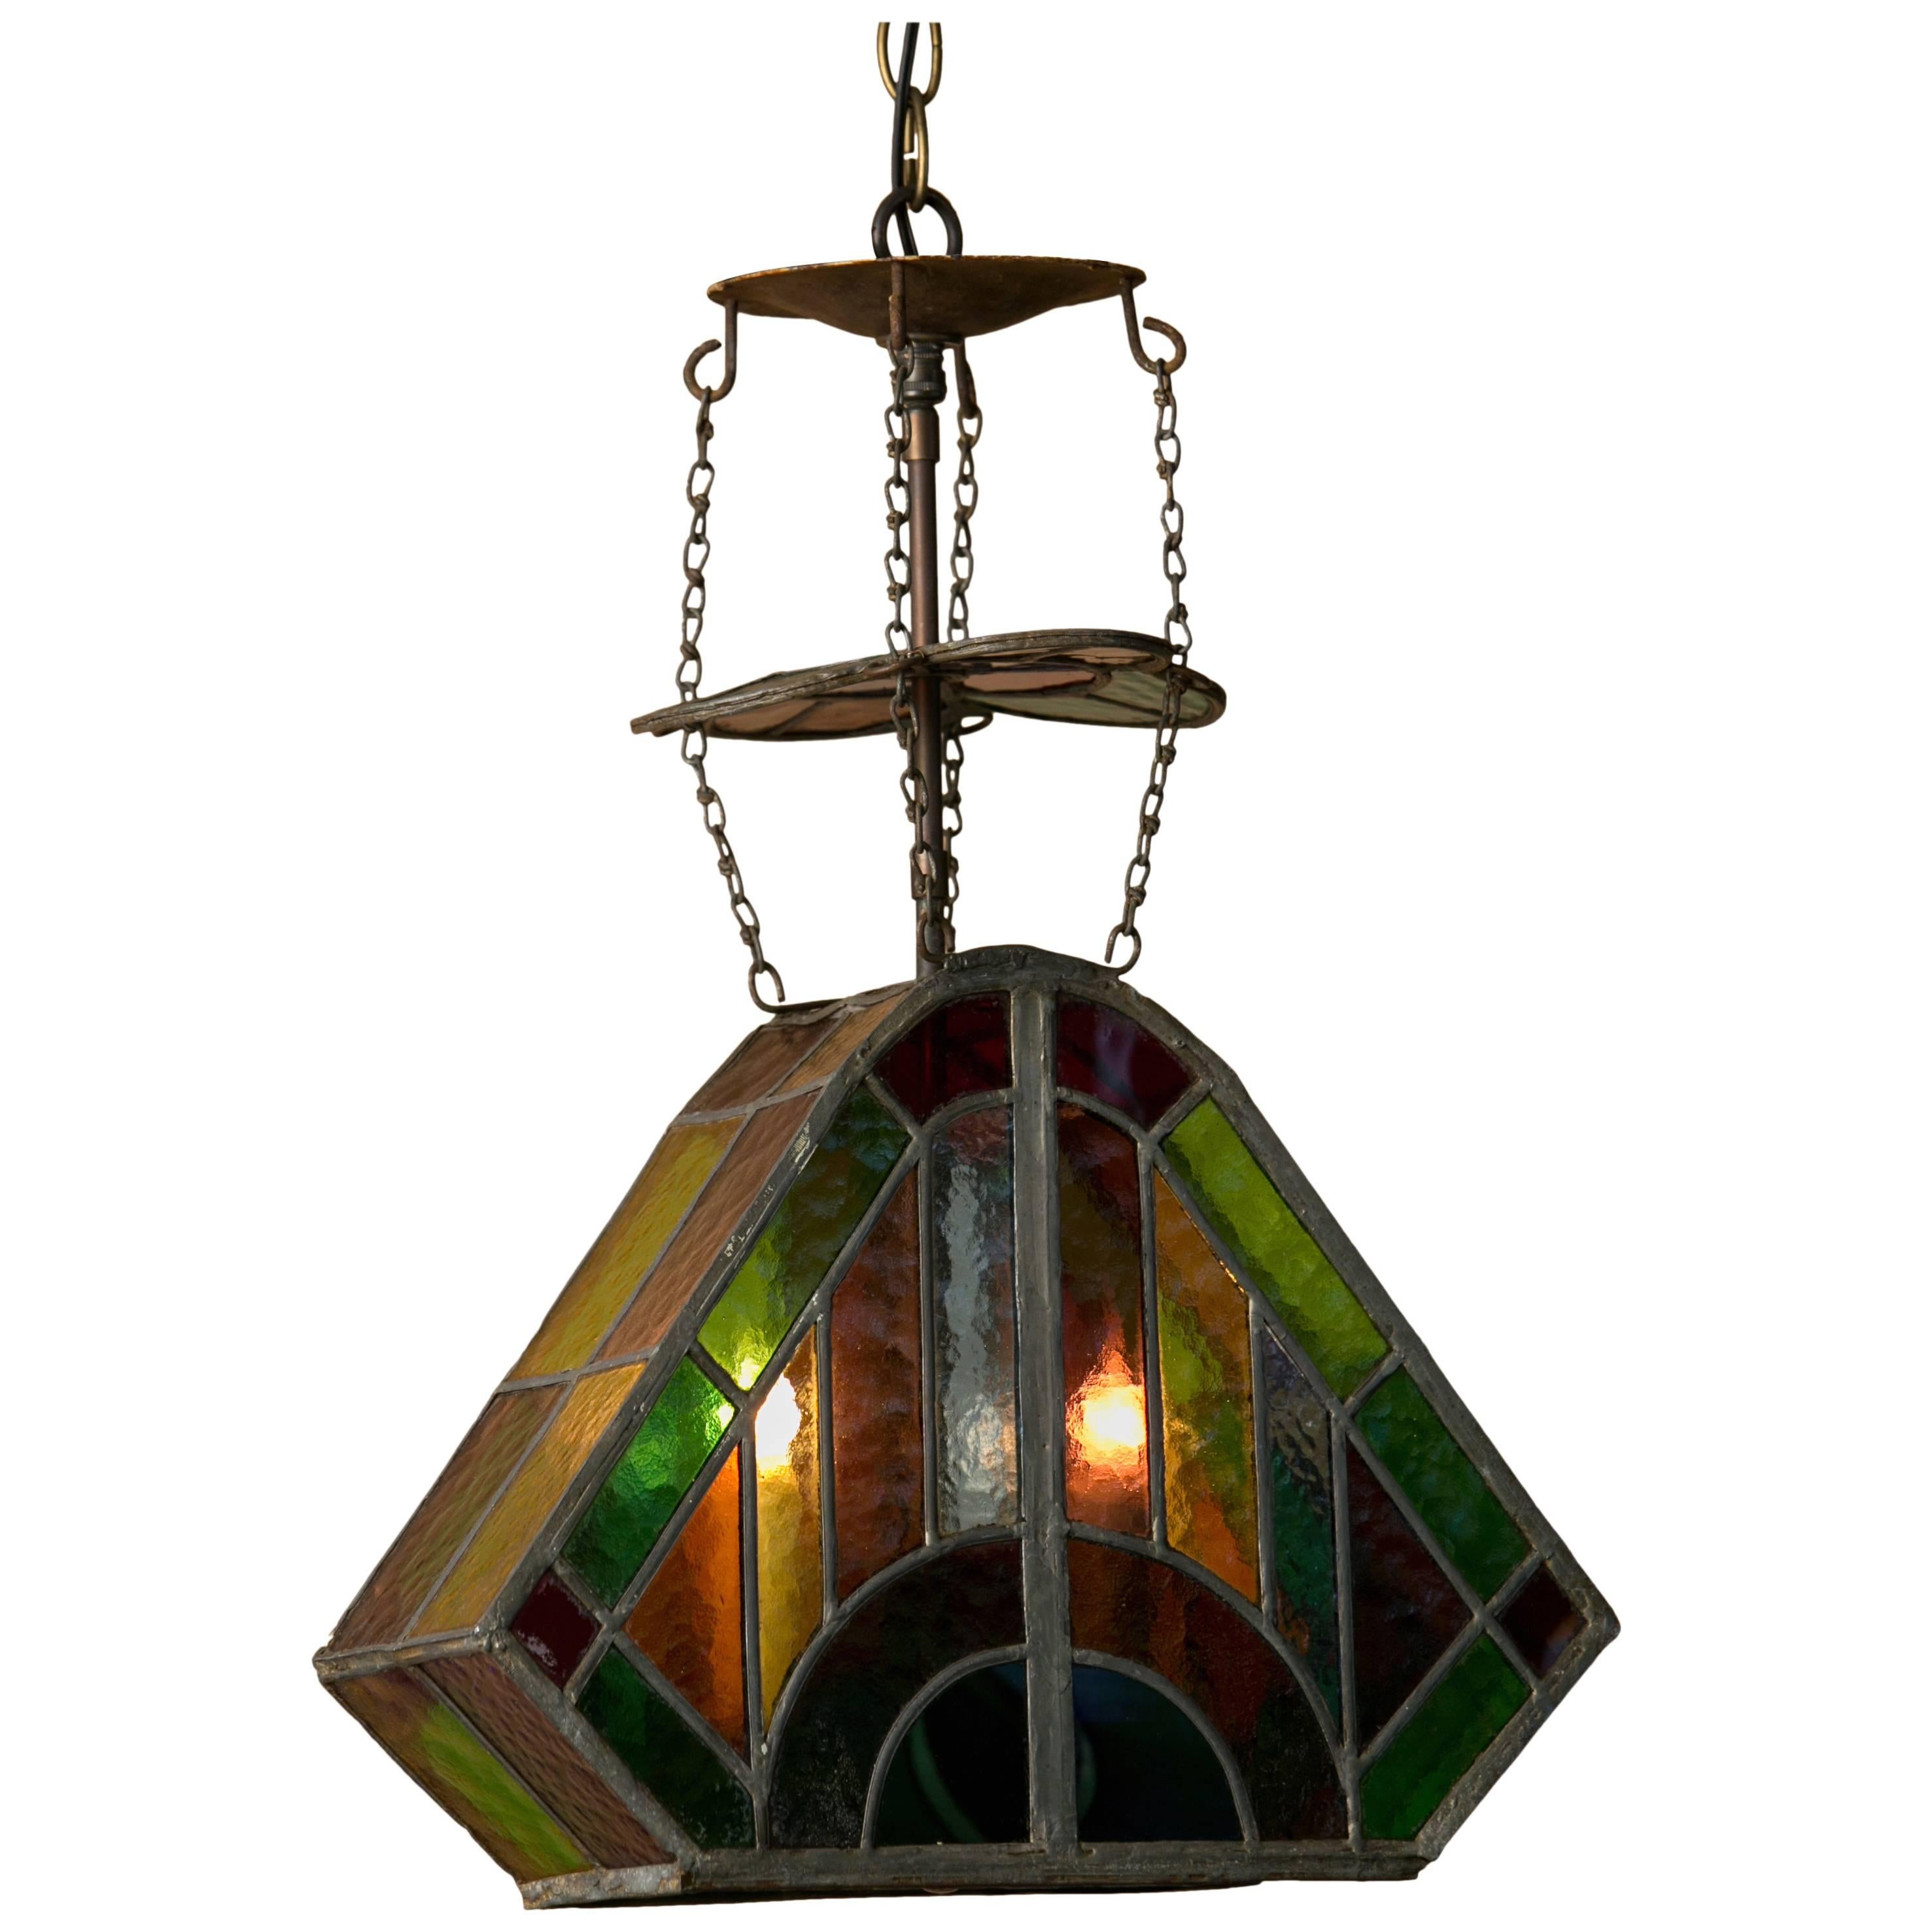 Hand-Crafted Arts & Crafts Leaded Stained Glass Lantern from Holland, circa 1920